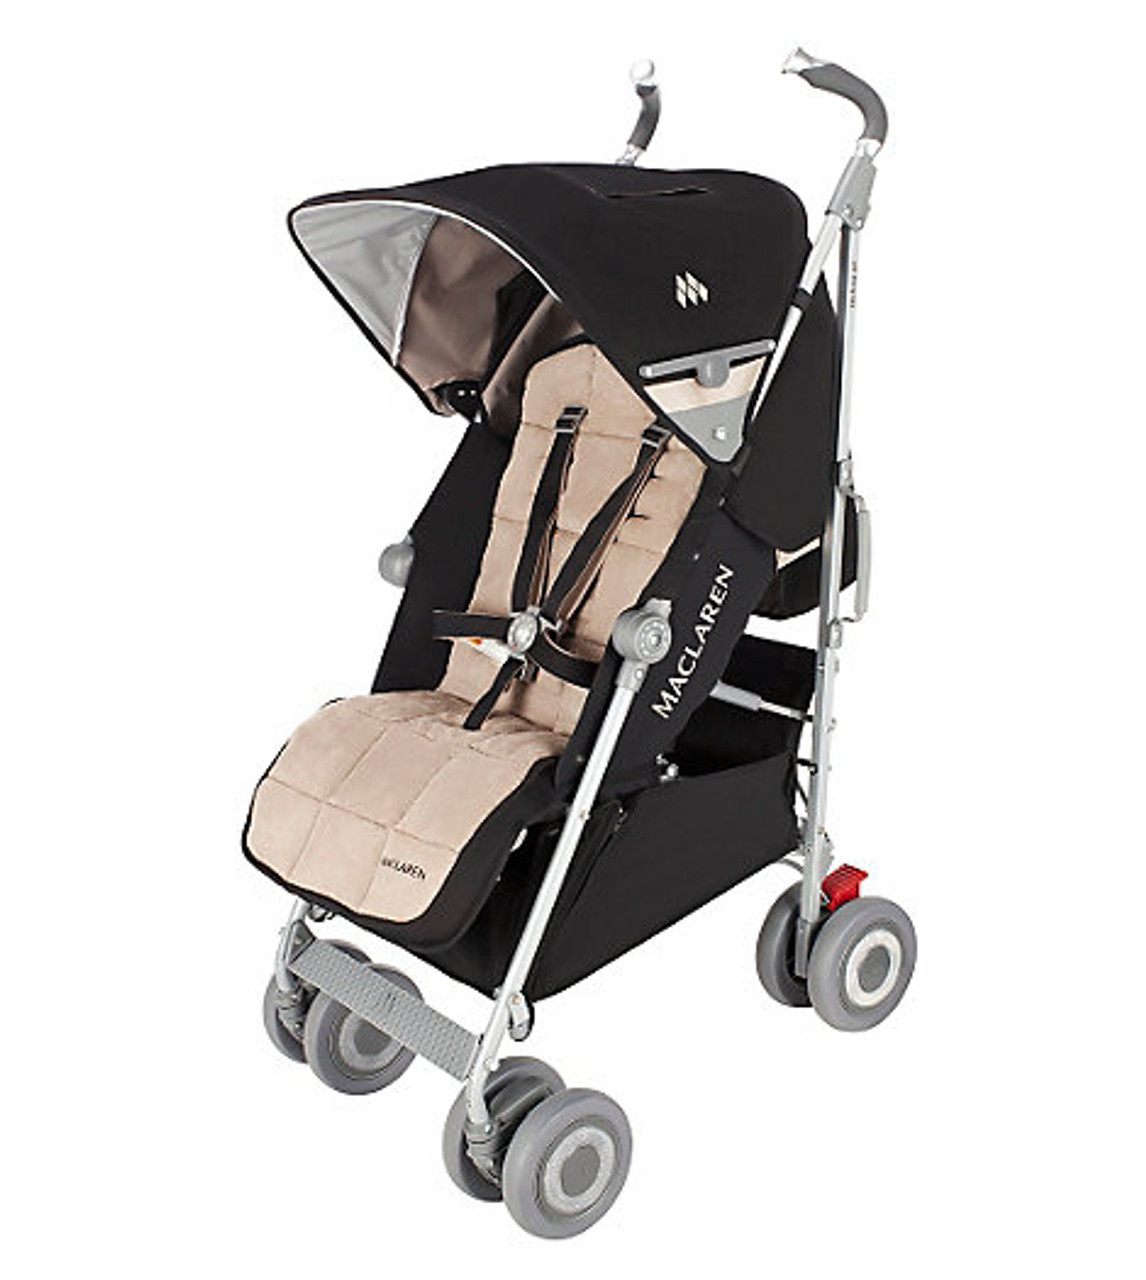 Maclaren Techno XLR Stroller in Black and Champagne - Bambi Baby Store